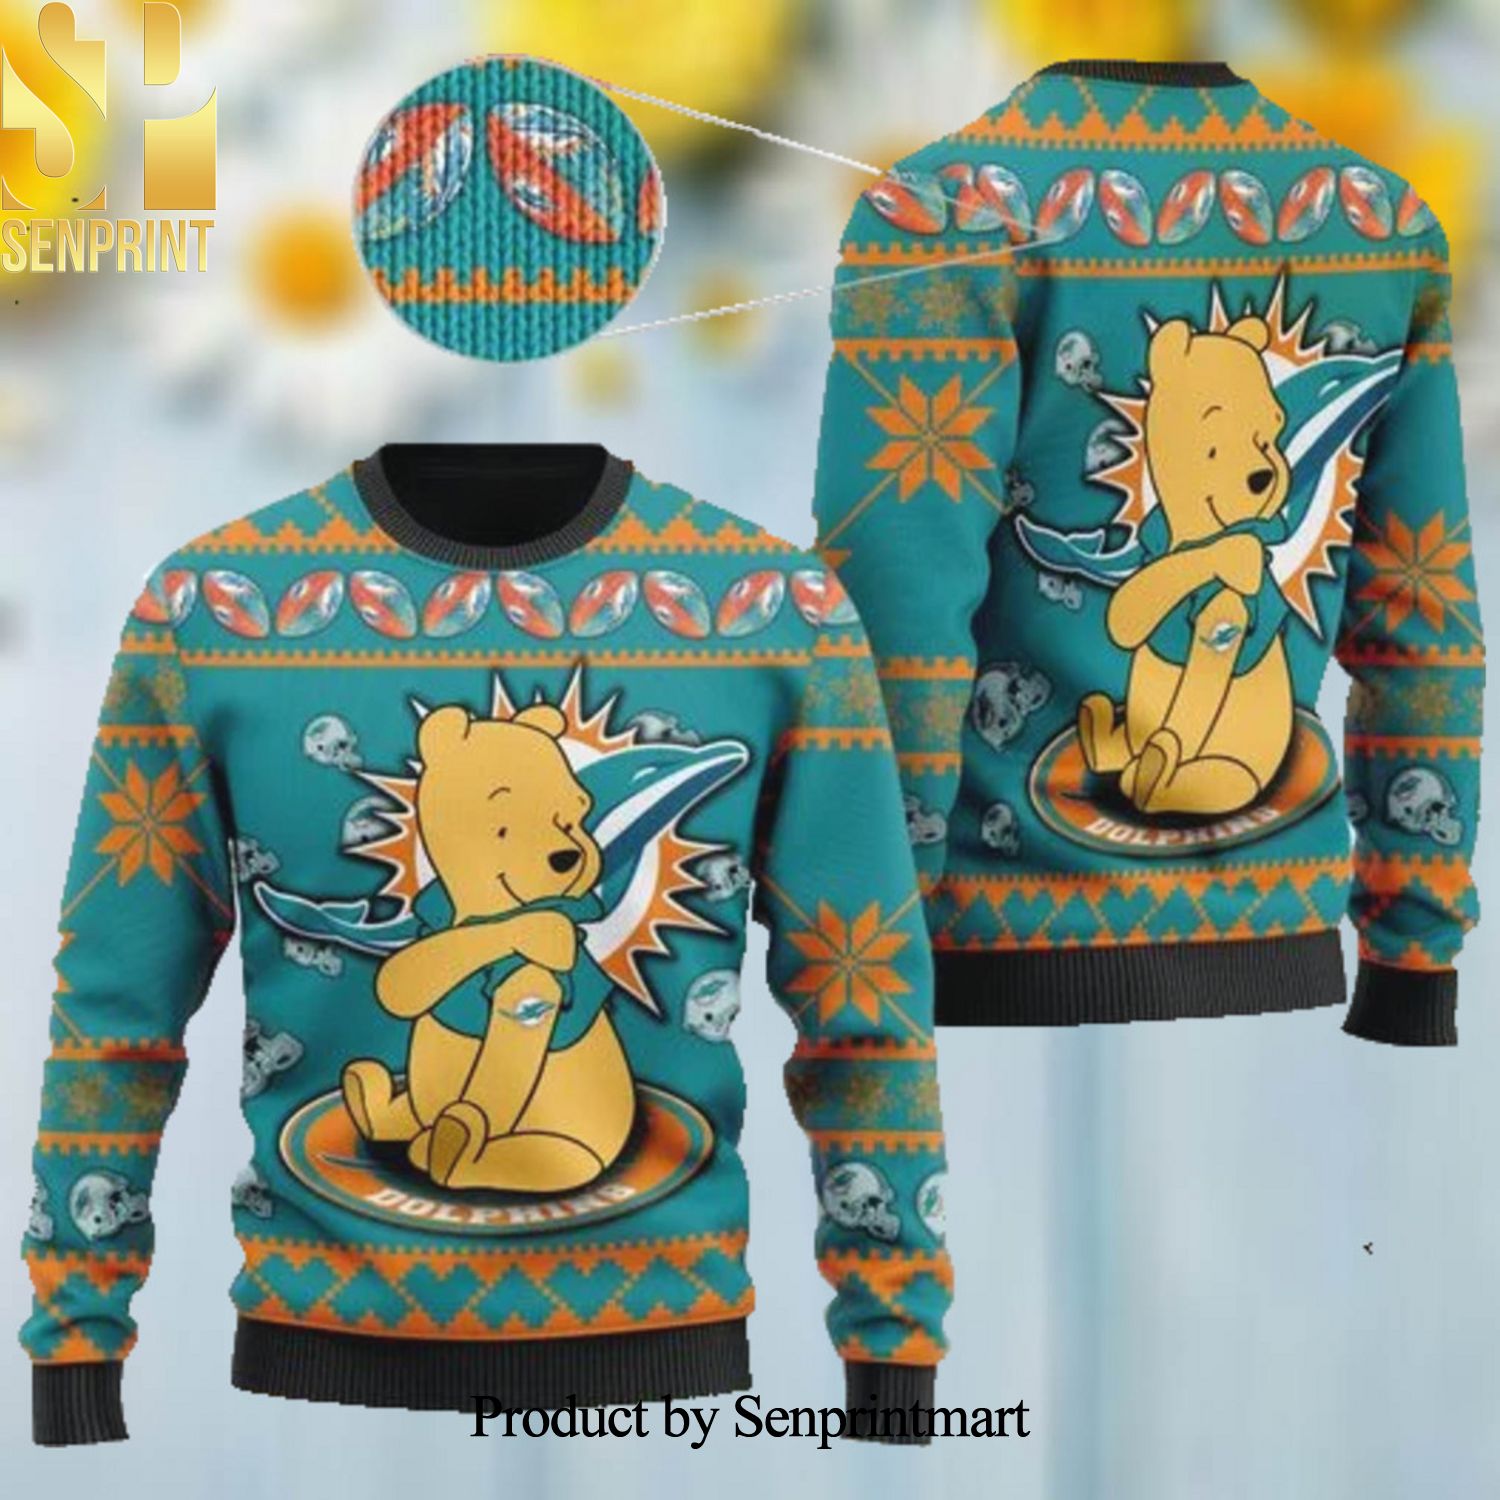 Miami Dolphins NFL American Football Team Logo Cute Winnie The Pooh Bear Christmas Wool Knitted 3D Sweater